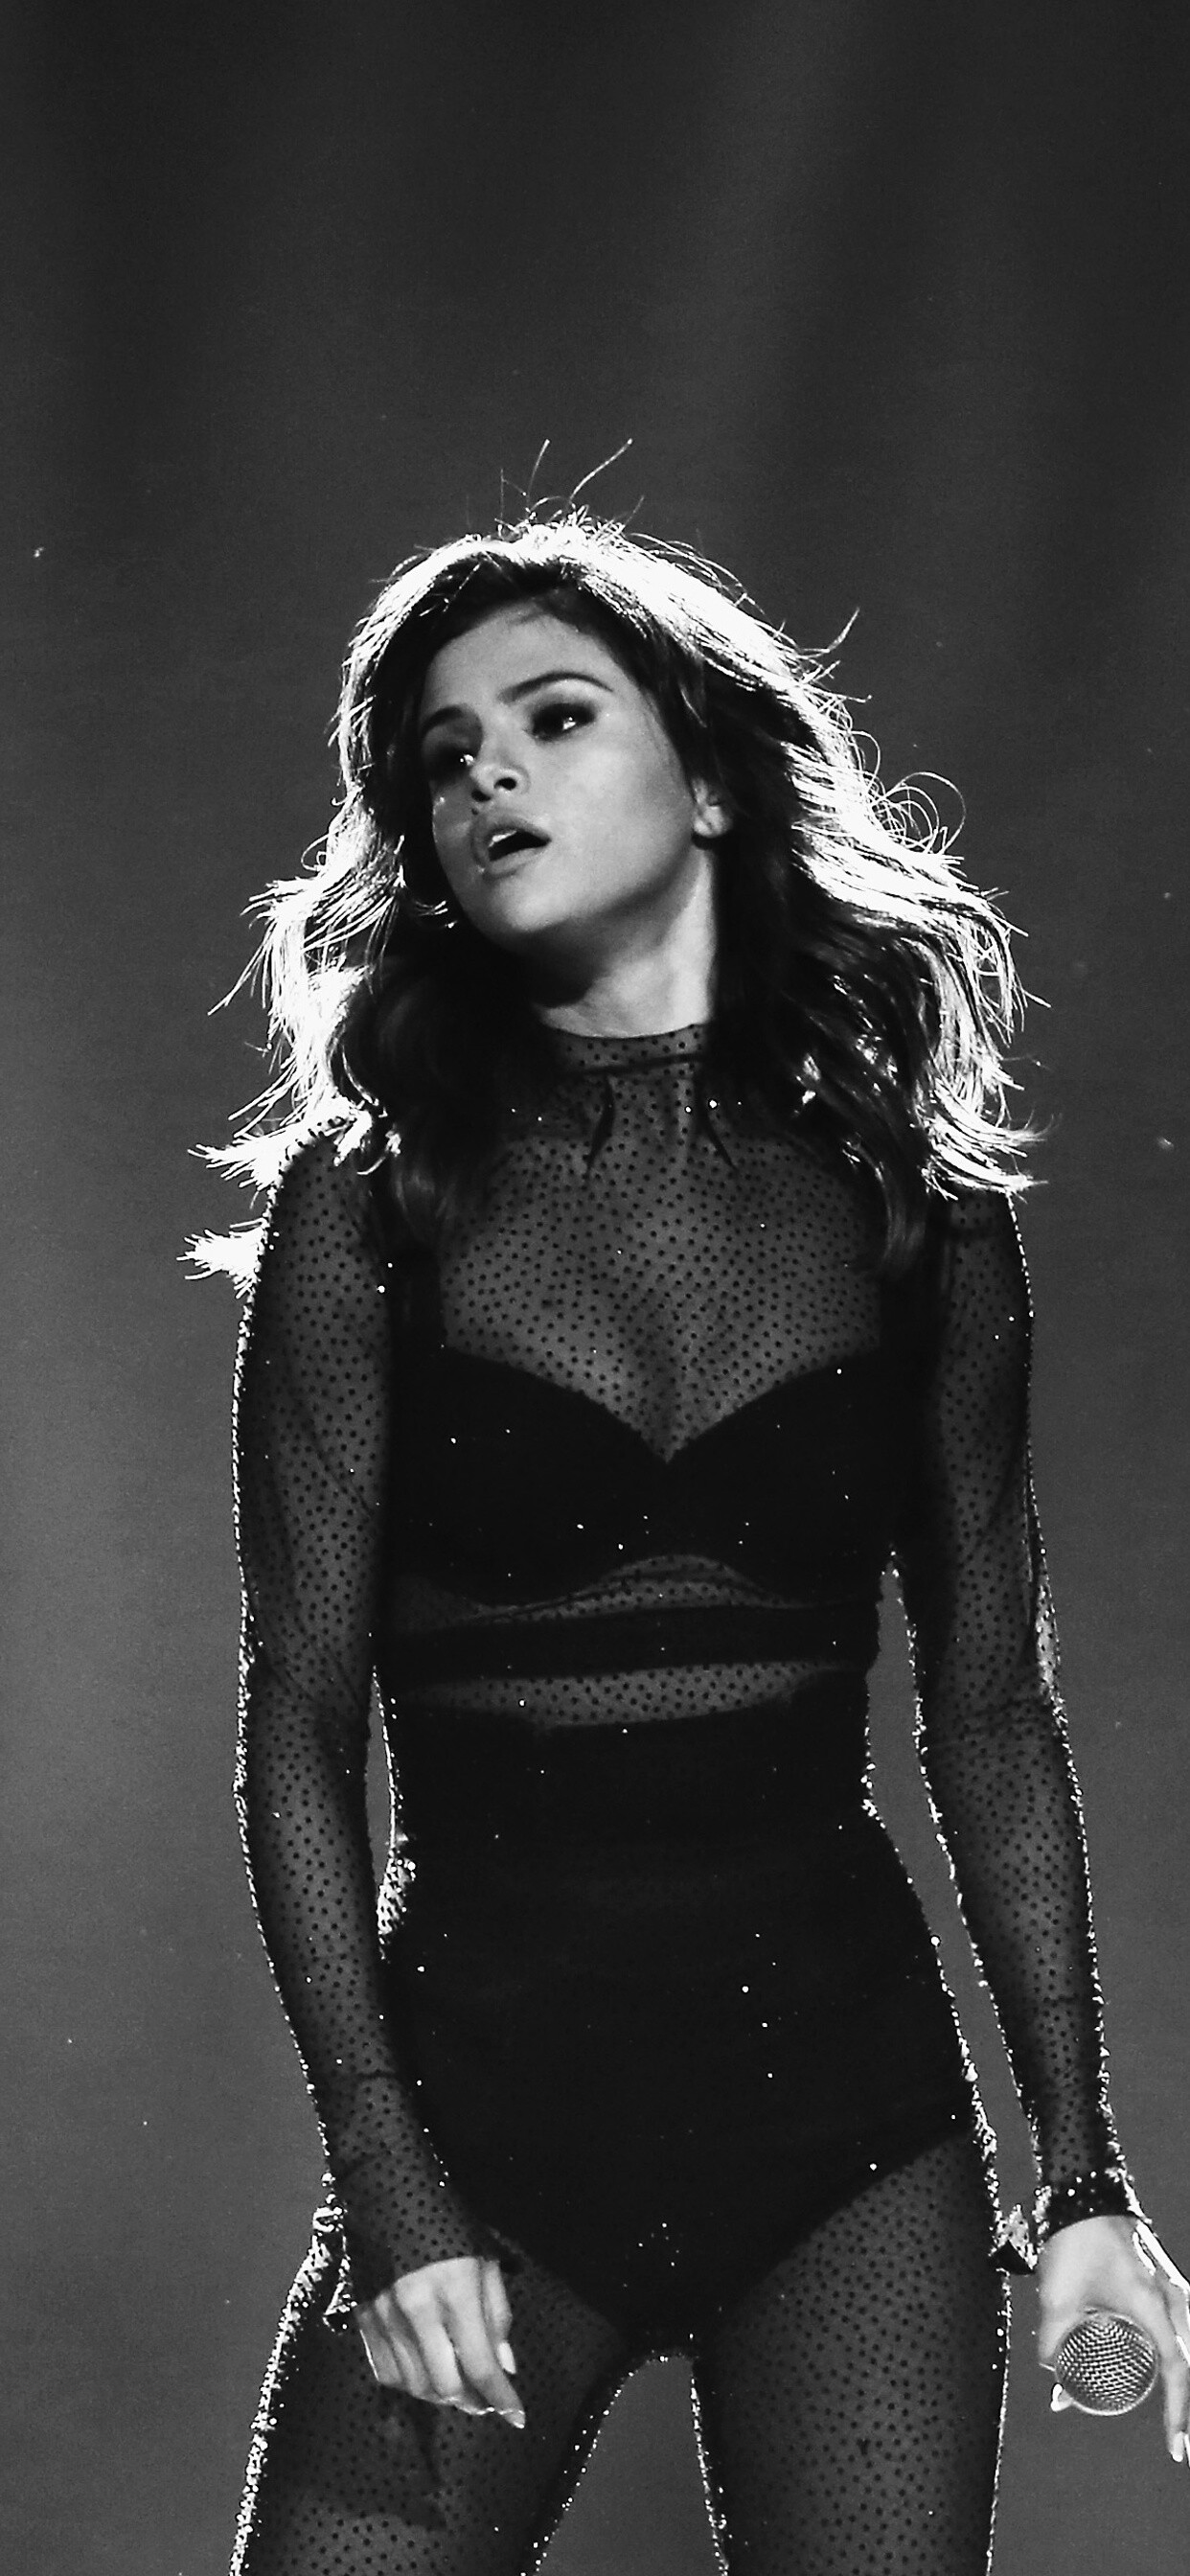 Selena Gomez: The most followed musician and actress on Instagram, Monochrome. 1250x2690 HD Background.